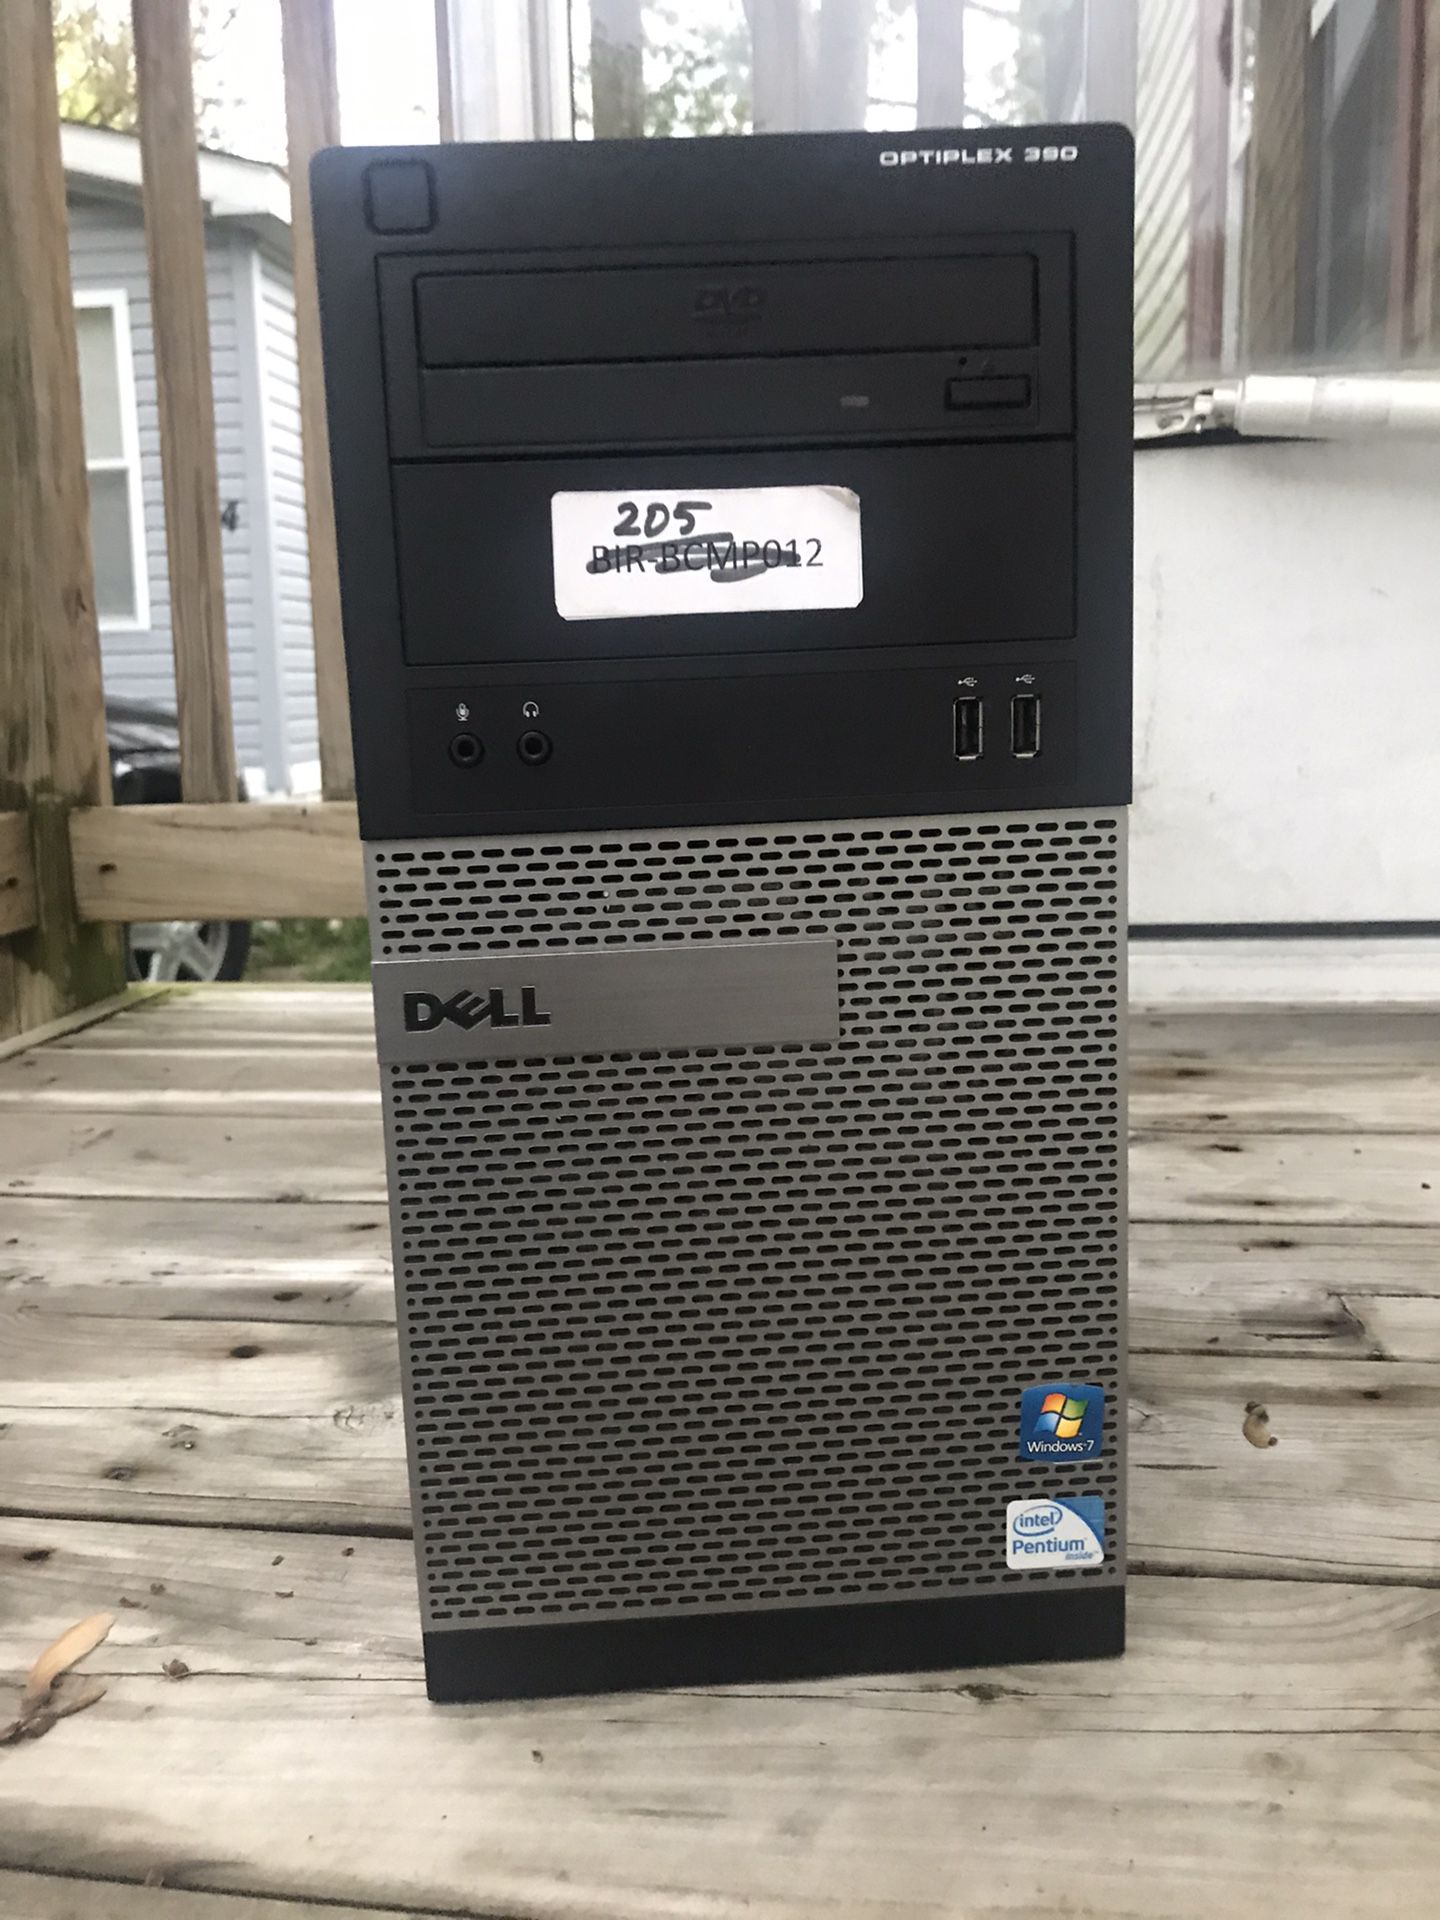 Dell gaming pc